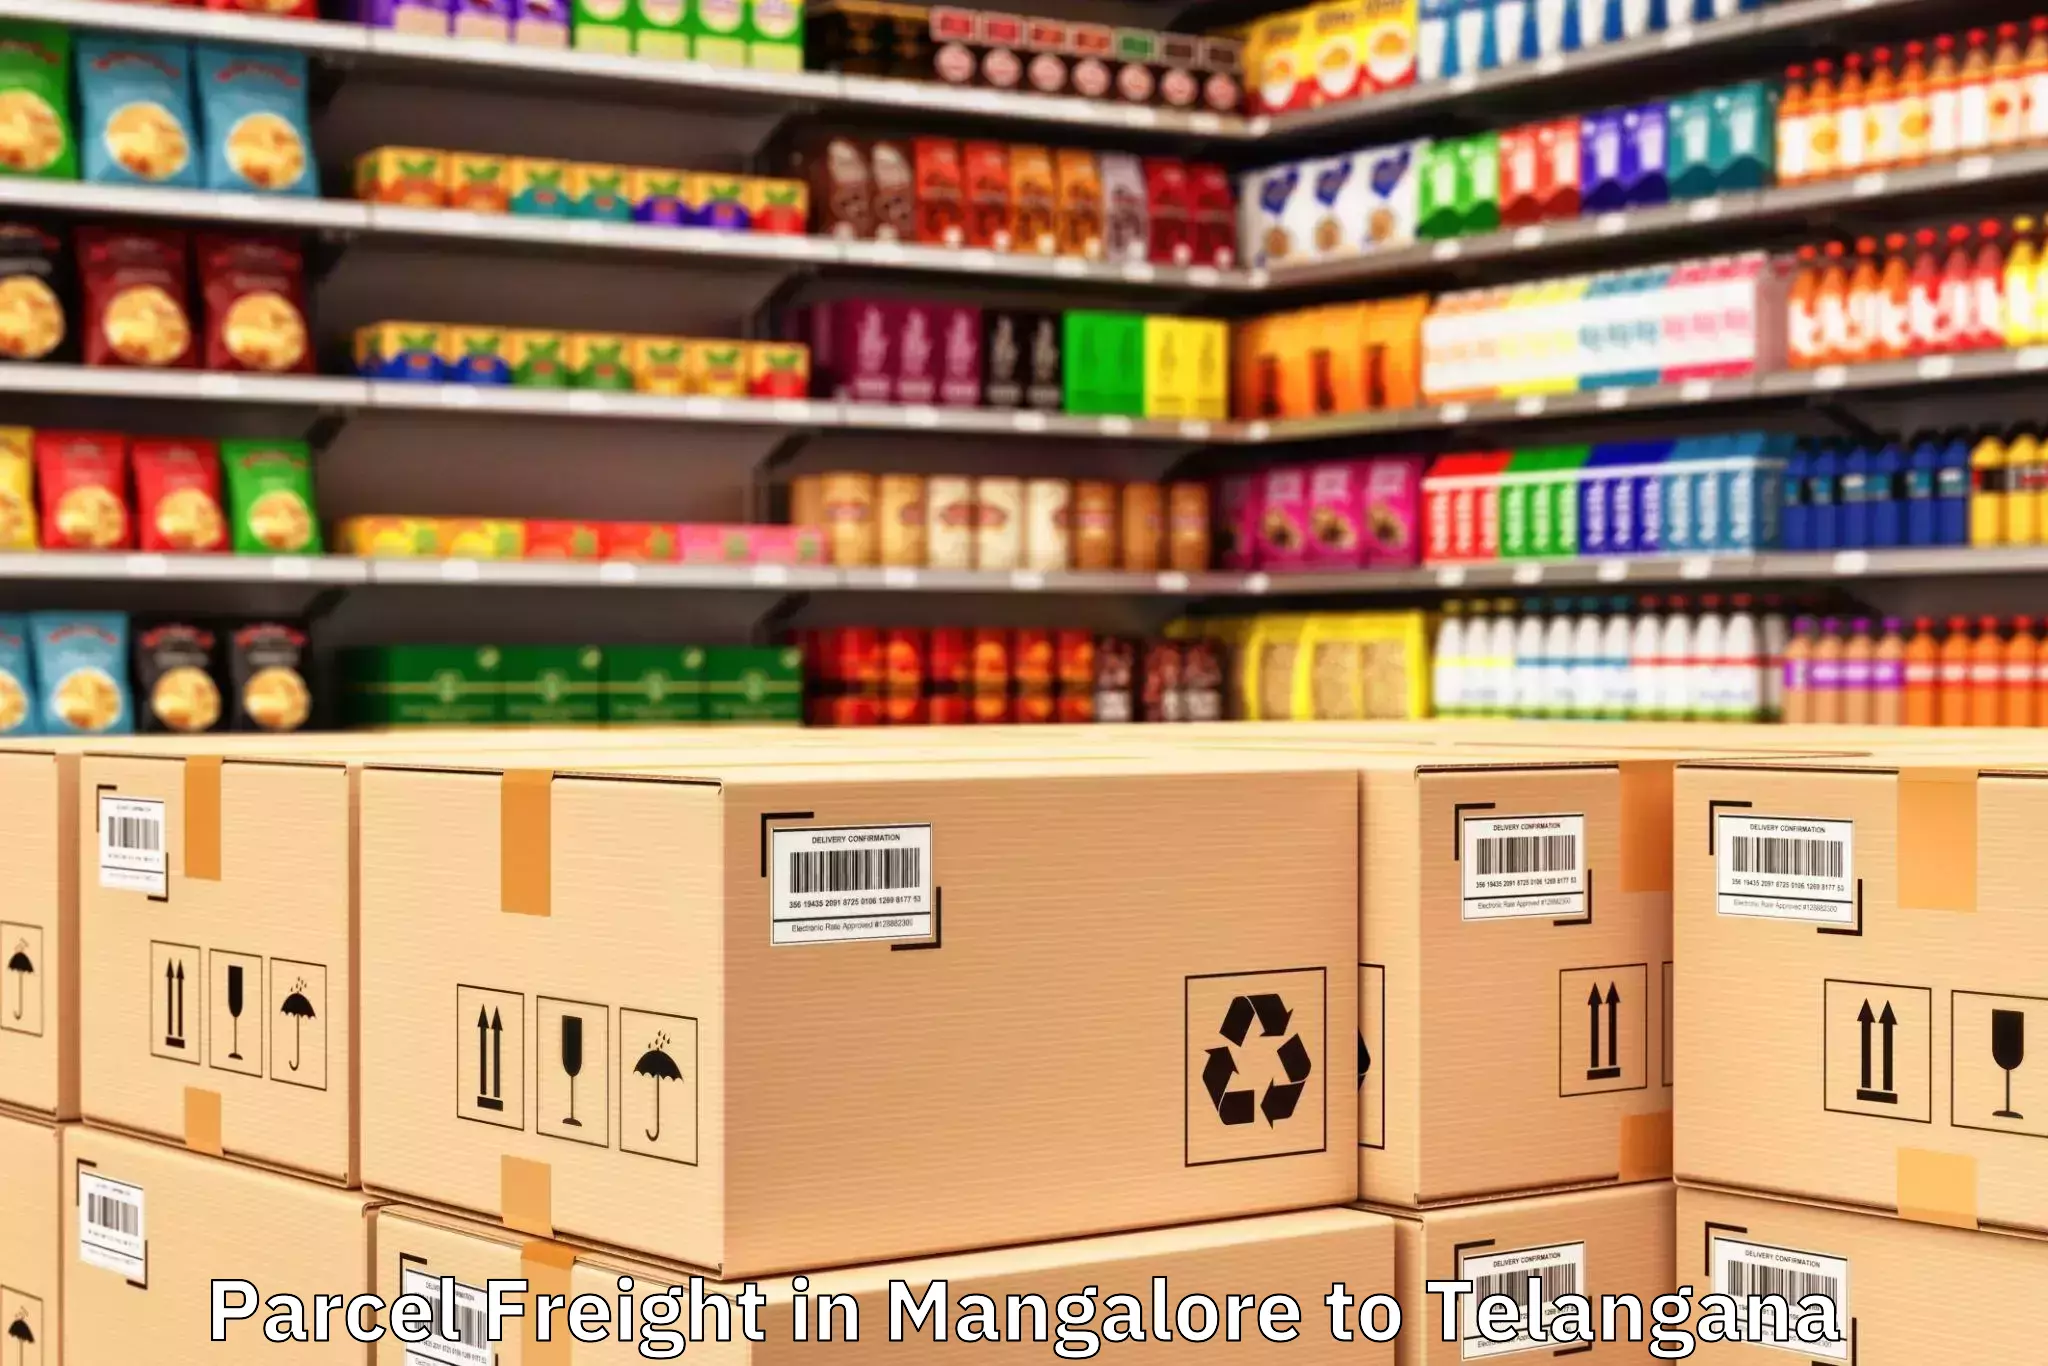 Professional Mangalore to Wanaparthy Parcel Freight